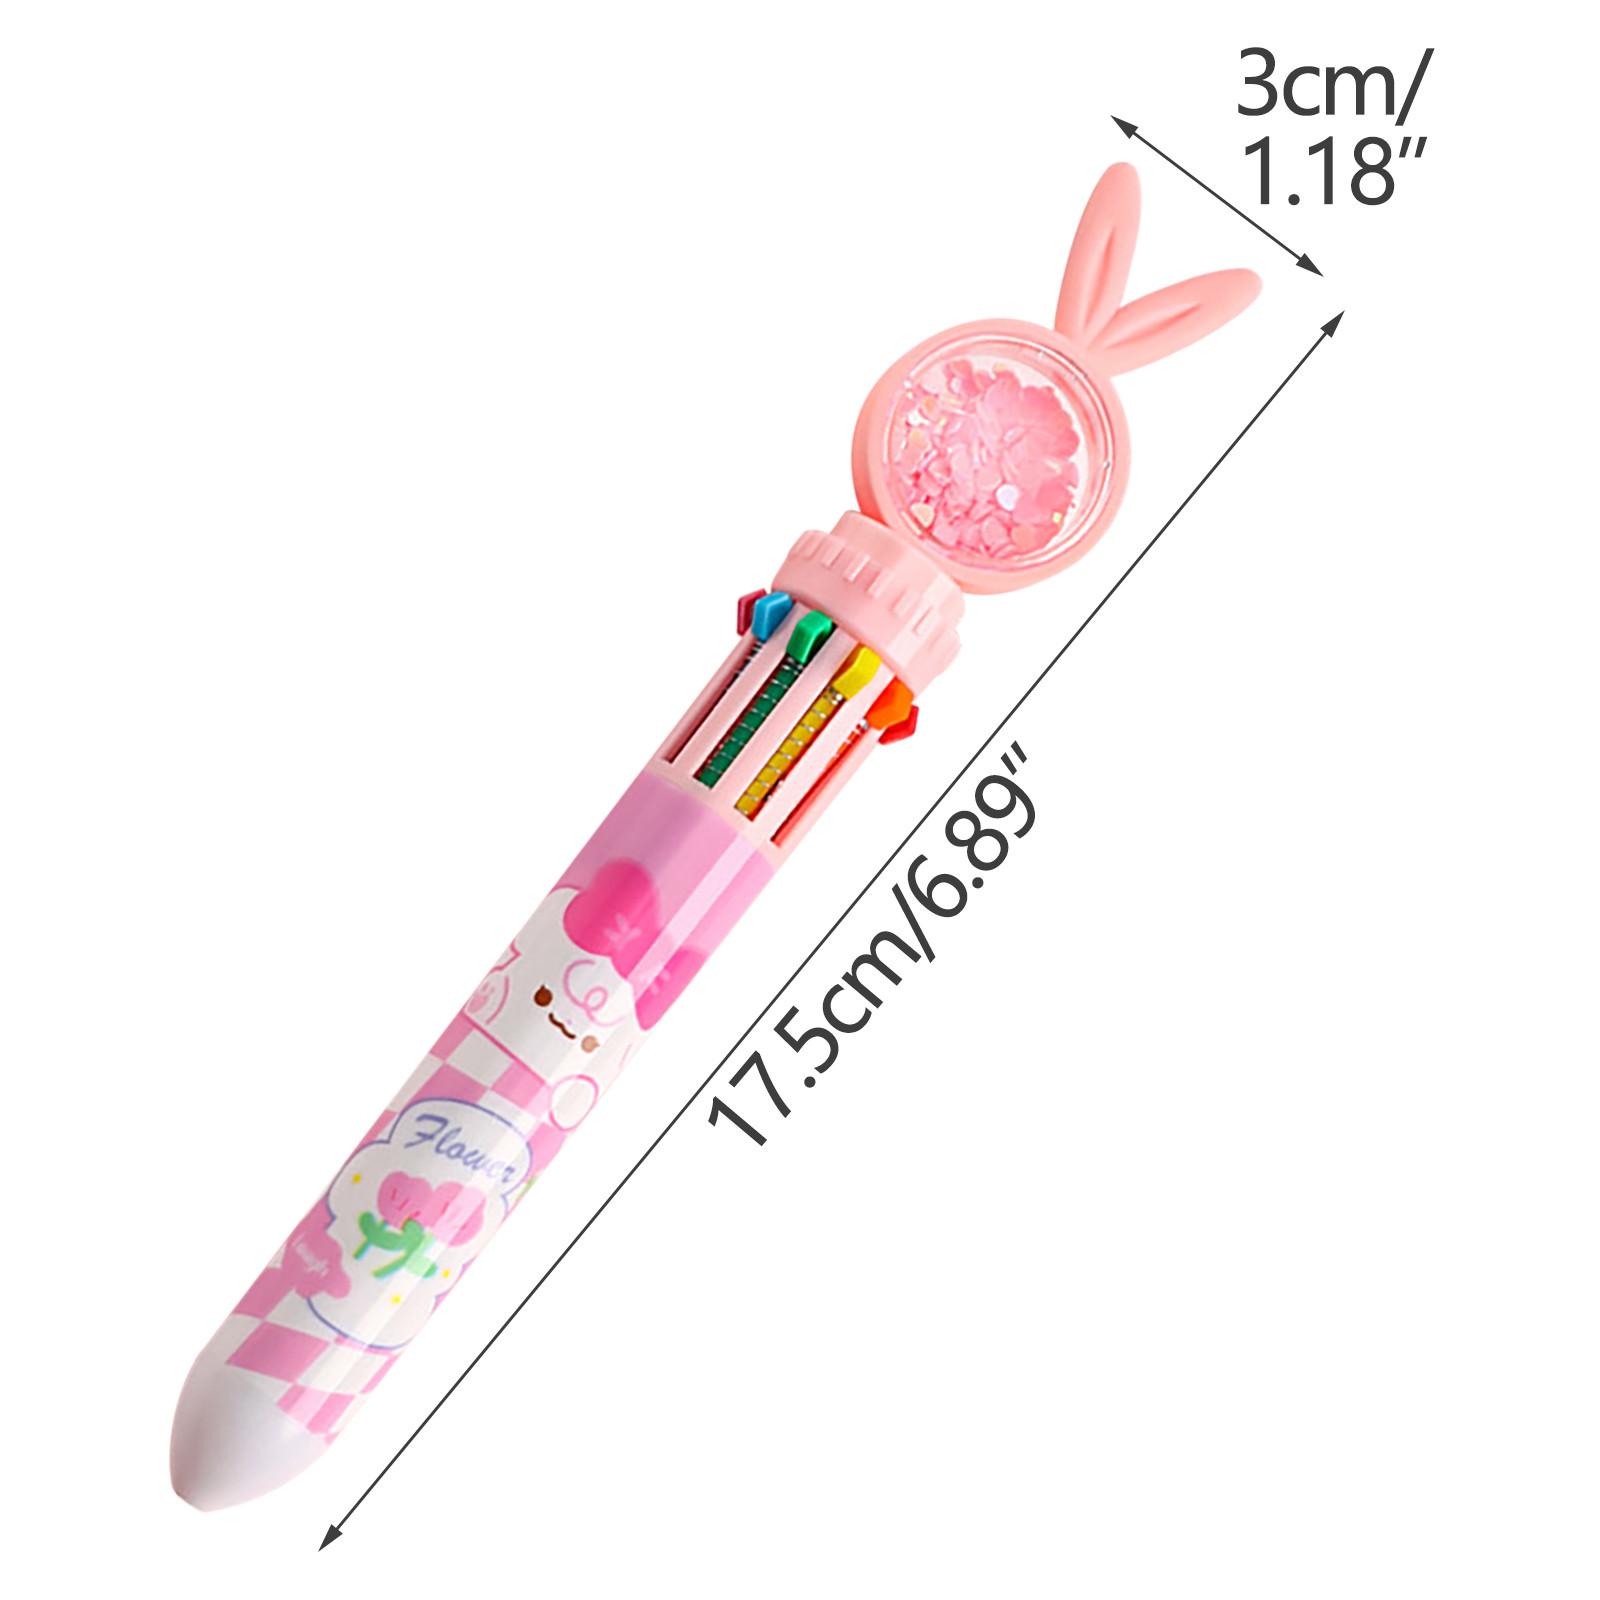 Cute Rabbit Animal Multicolor Pen, Ink Multicolor Pen in One, 10-In-1  Colored Multi Color Pen, Multicolored Pens for Office Home School Supplies  Students Children Gift 